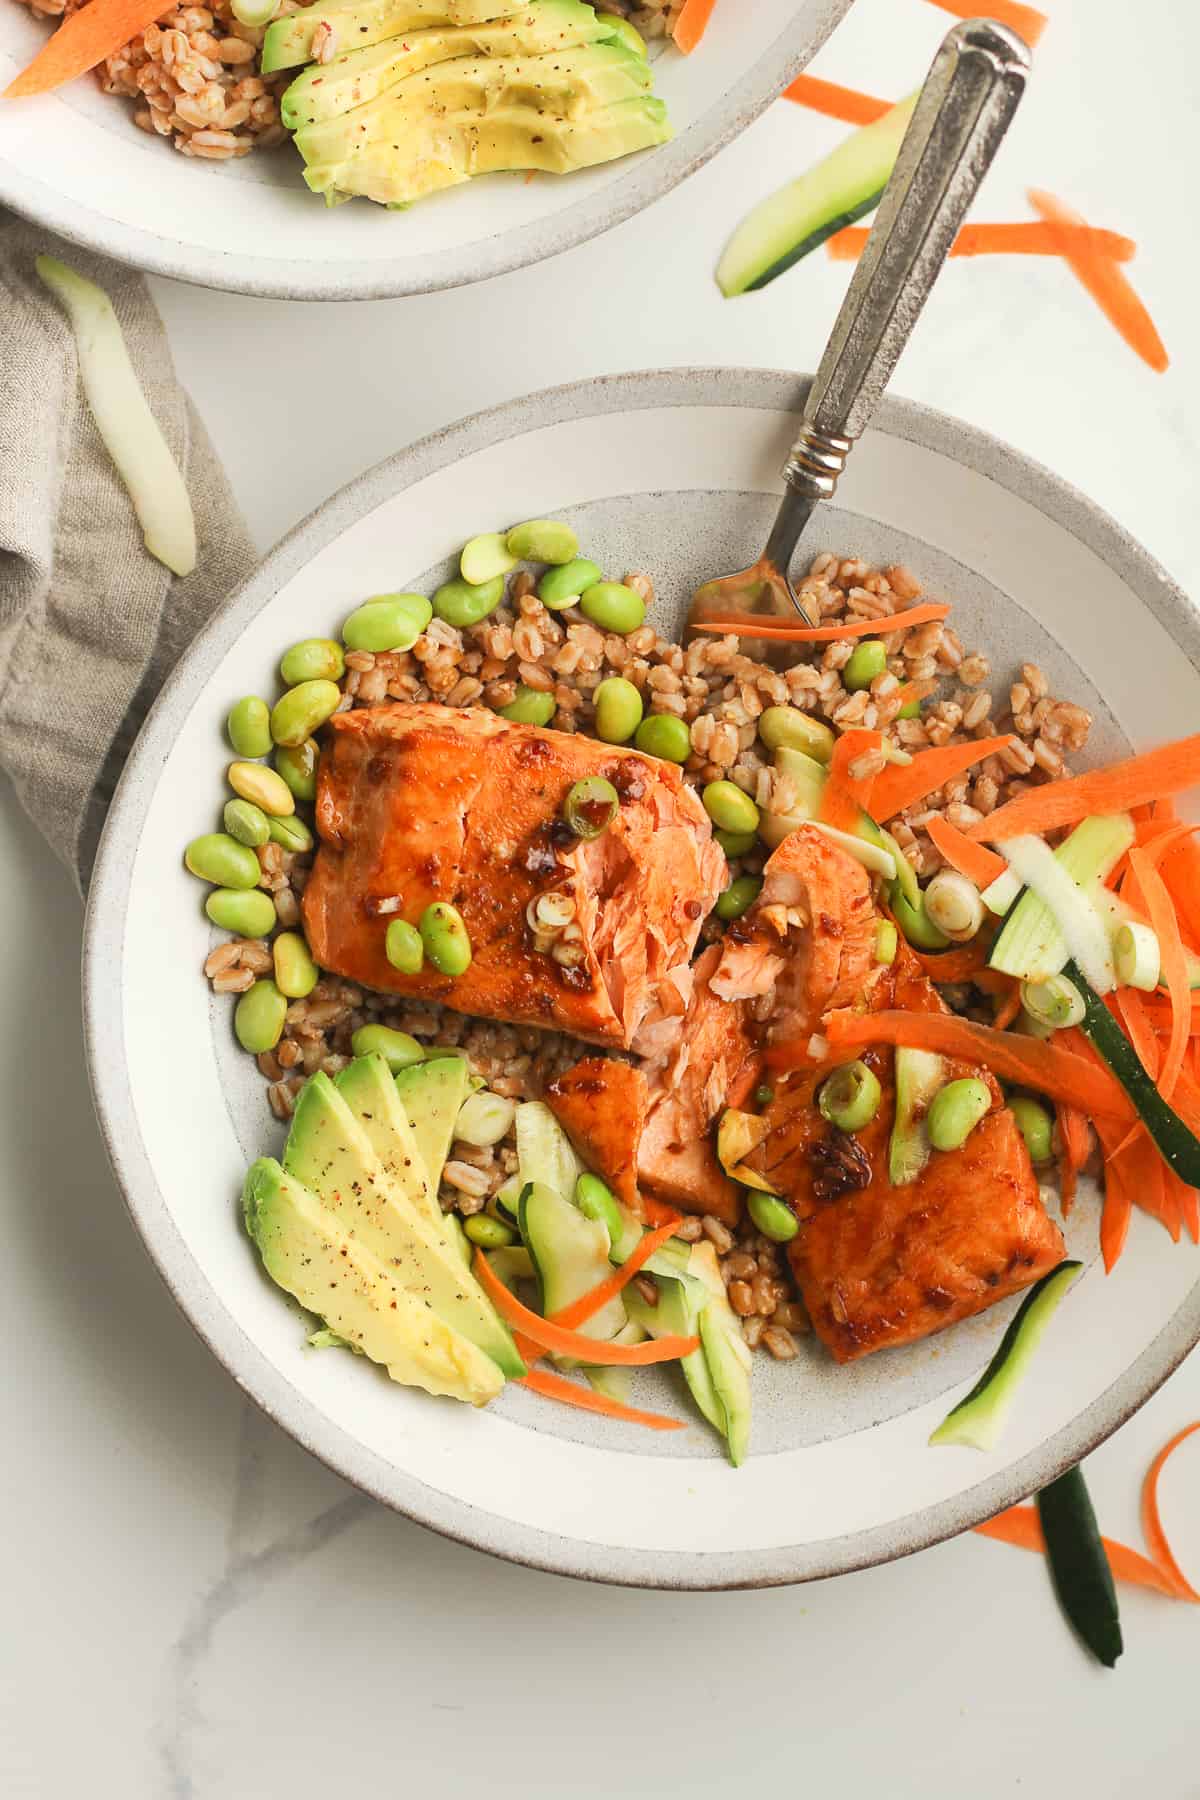 Overhead shot of a bowl with salmon and grains.